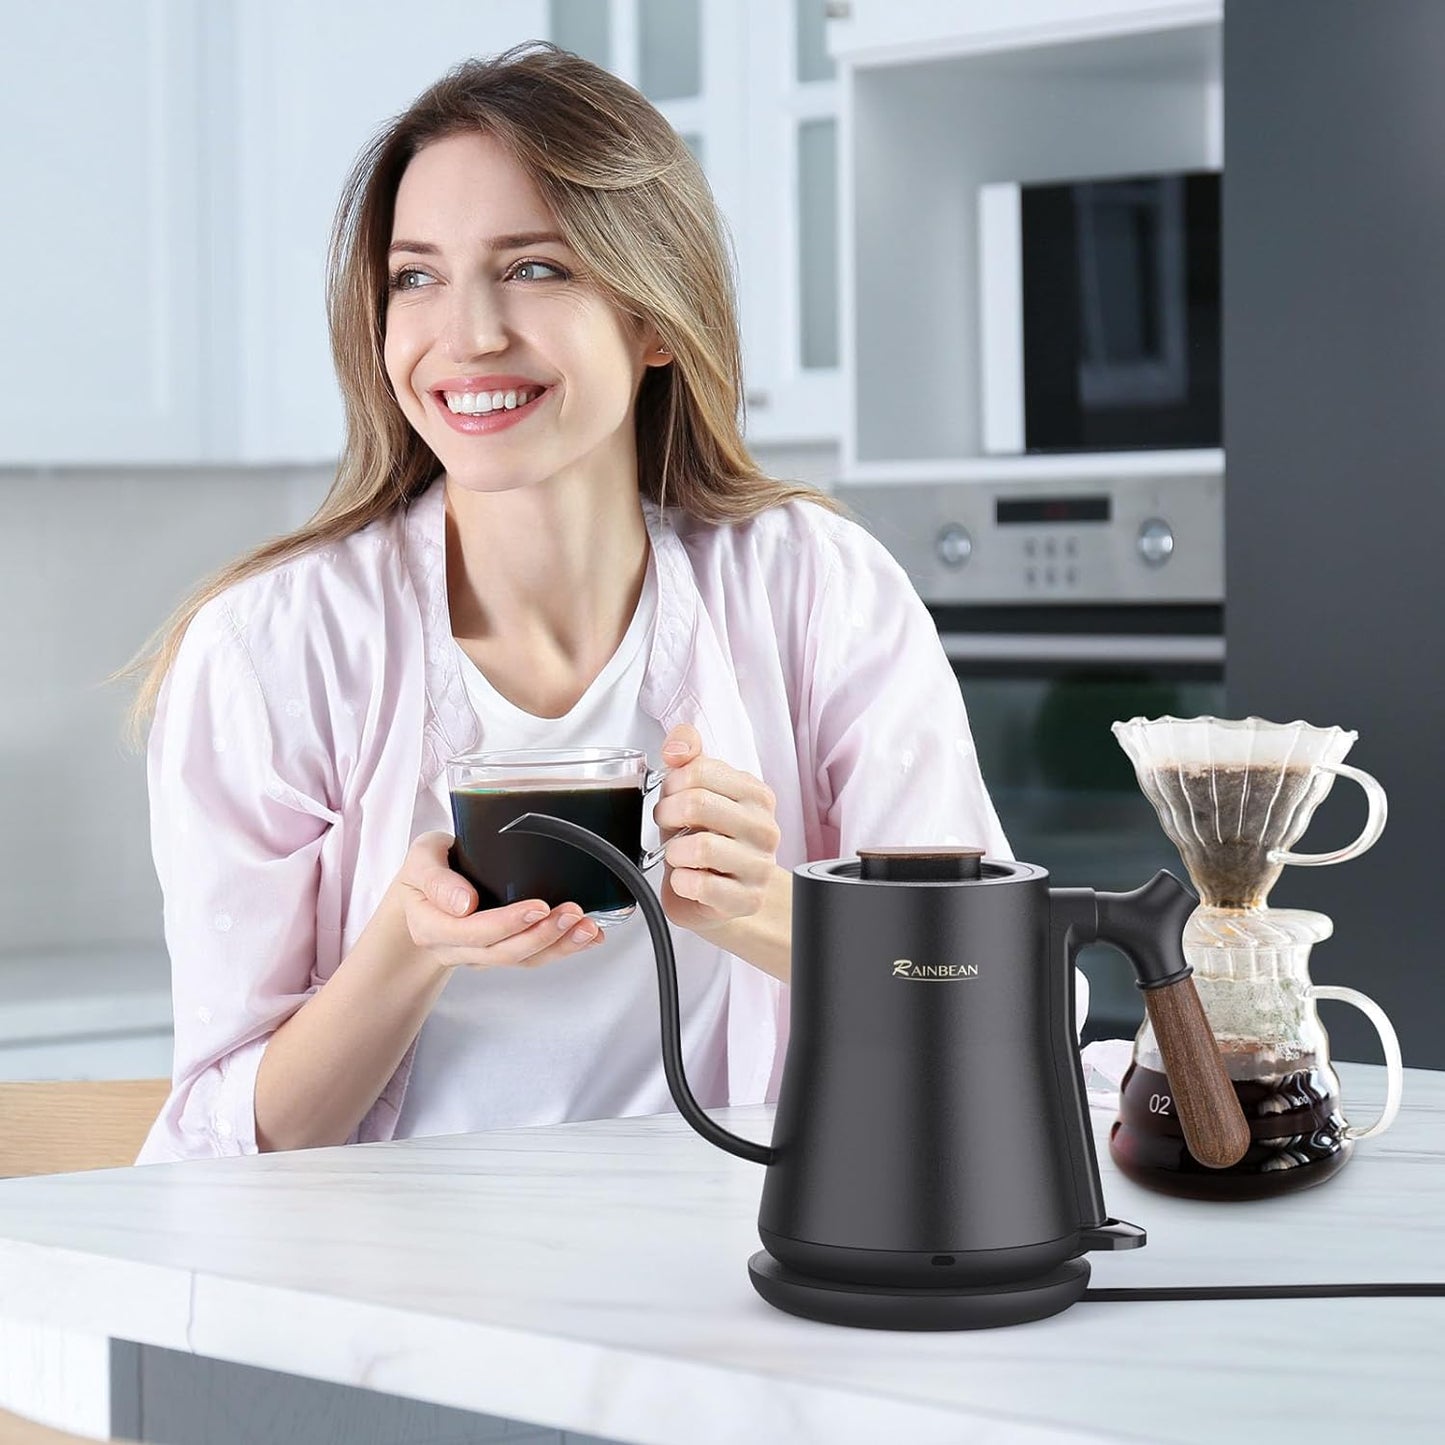 Gooseneck Electric Kettle, Pour Over Coffee Kettle Hot Water